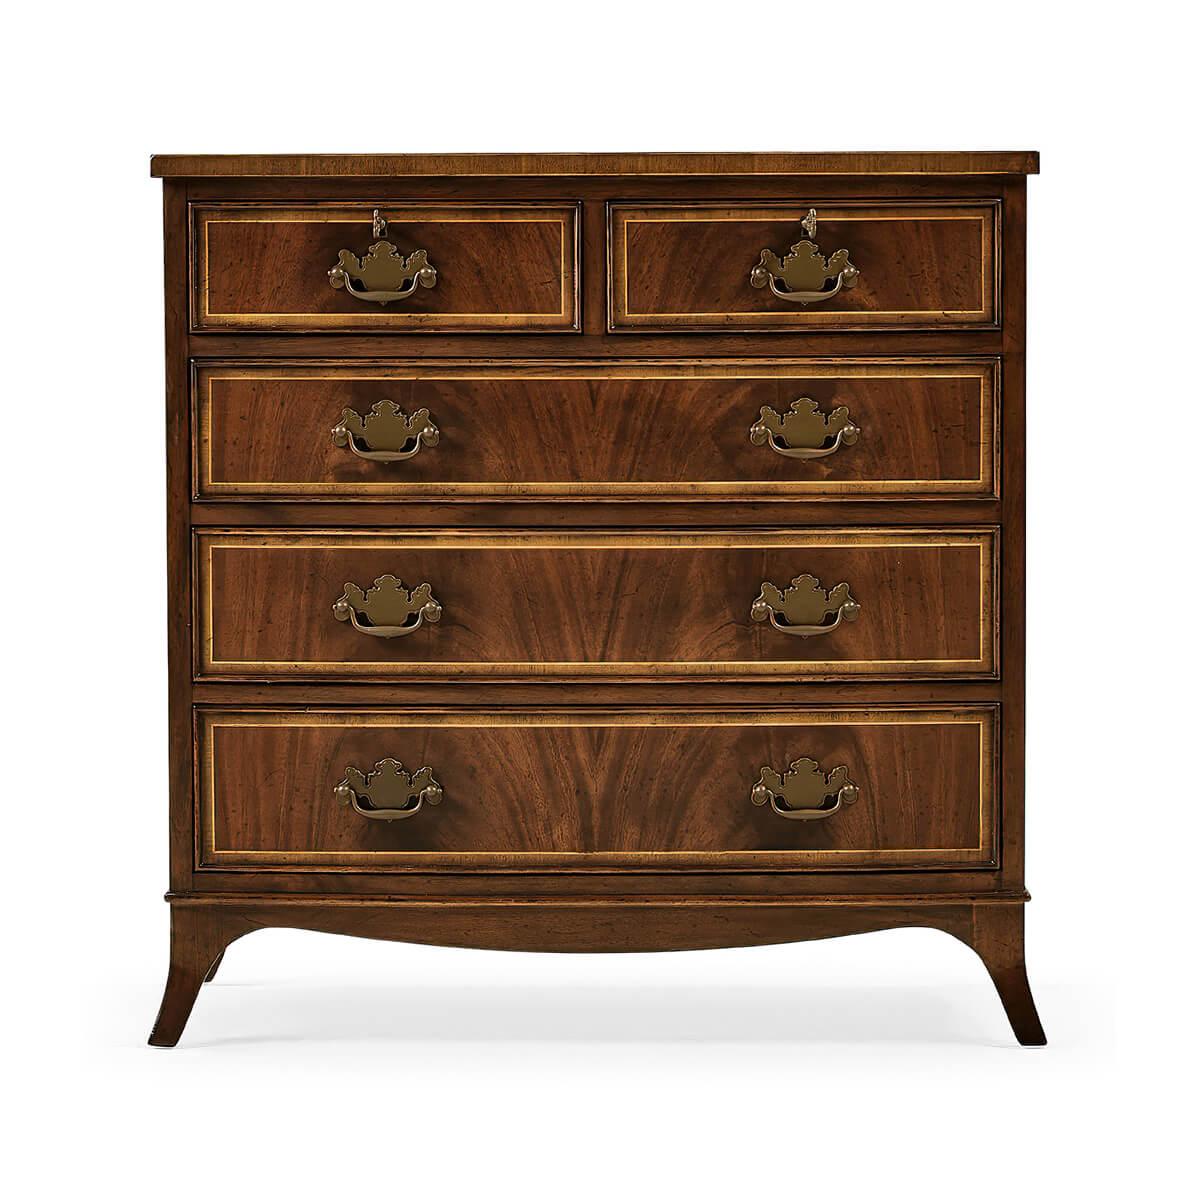 Classic Georgian style mahogany and crossbanded small chest of drawers ideal as a bedside chest, with oak secondary woods, light antique distress on the two short and three graduated long drawers. All set on splayed tapering legs. The original of